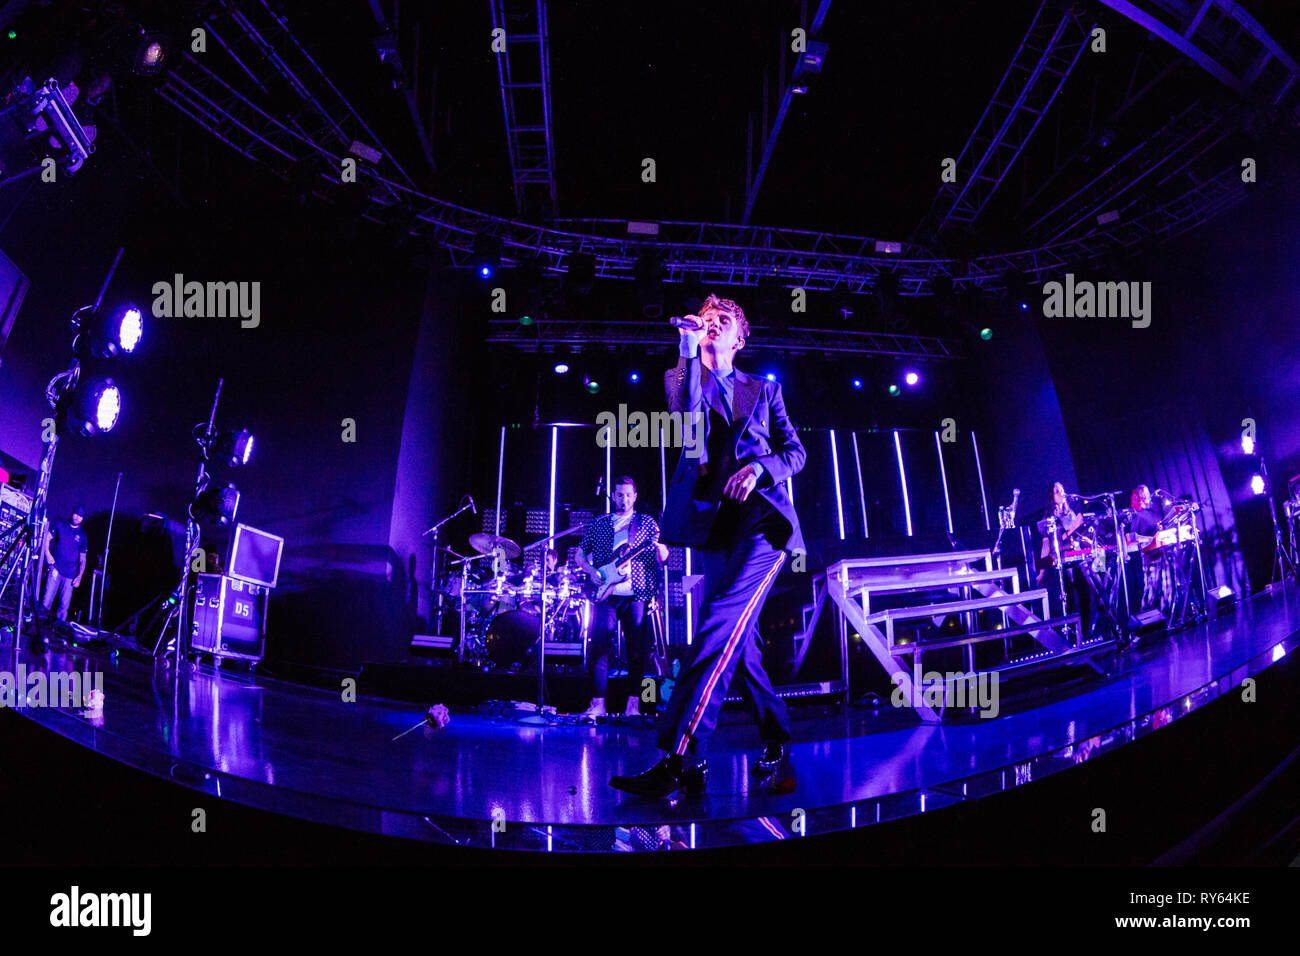 Milan, Italy. 11th Mar, 2019. The Australian pop singer-songwriter actor and Internet personality TROYE SIVAN performs live on stage at Fabrique during the 'Bloom Tour 2019' Credit: Rodolfo Sassano/Alamy Live News Stock Photo